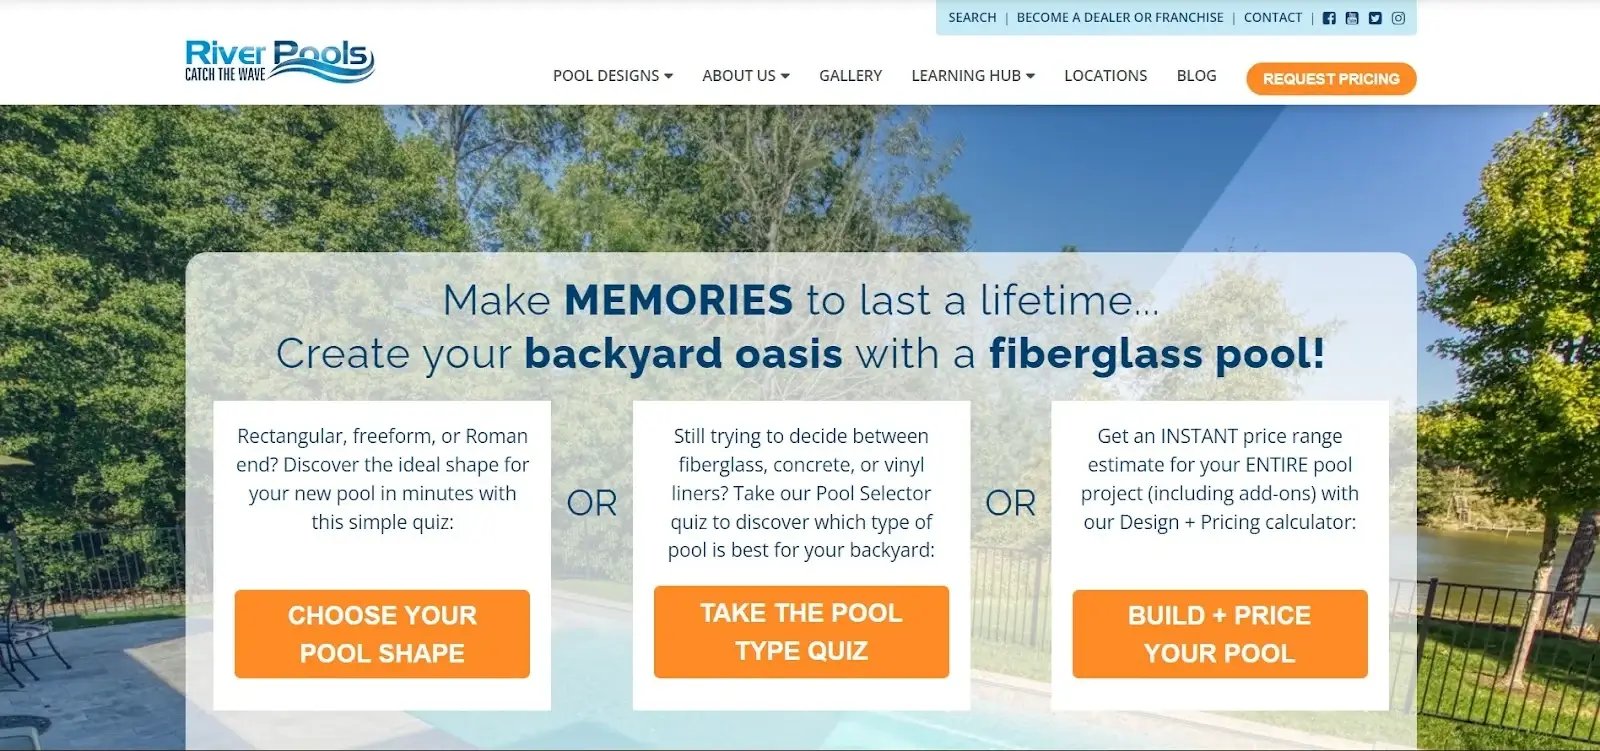 River Pools and Spas leverages customer reviews to boost their organic traffic.